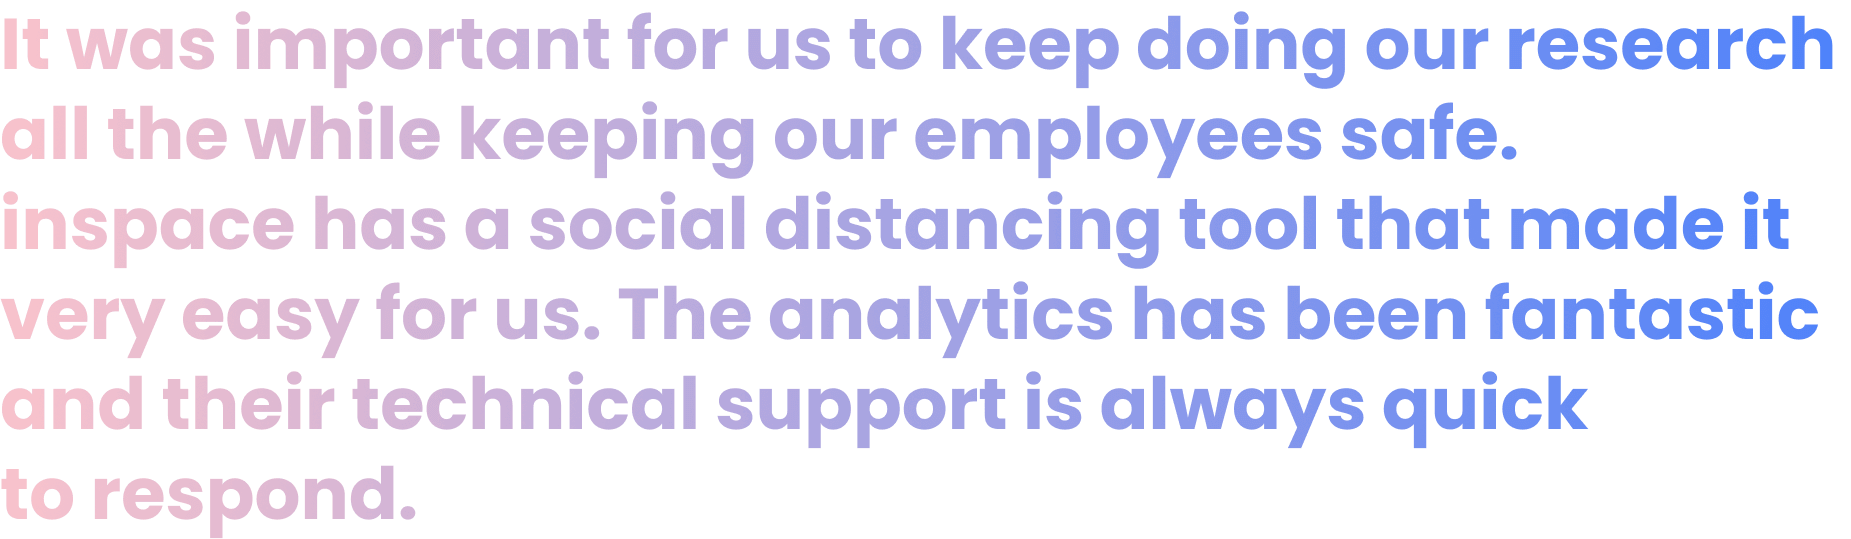 It was important for us to keep doing our research all the while keeping our employees safe. inspace has a social distancing tool that made it very easy for us. The analytics has been fantastic and their technical support is always quick to respond. Ramses Alcaide CEO, Neurable